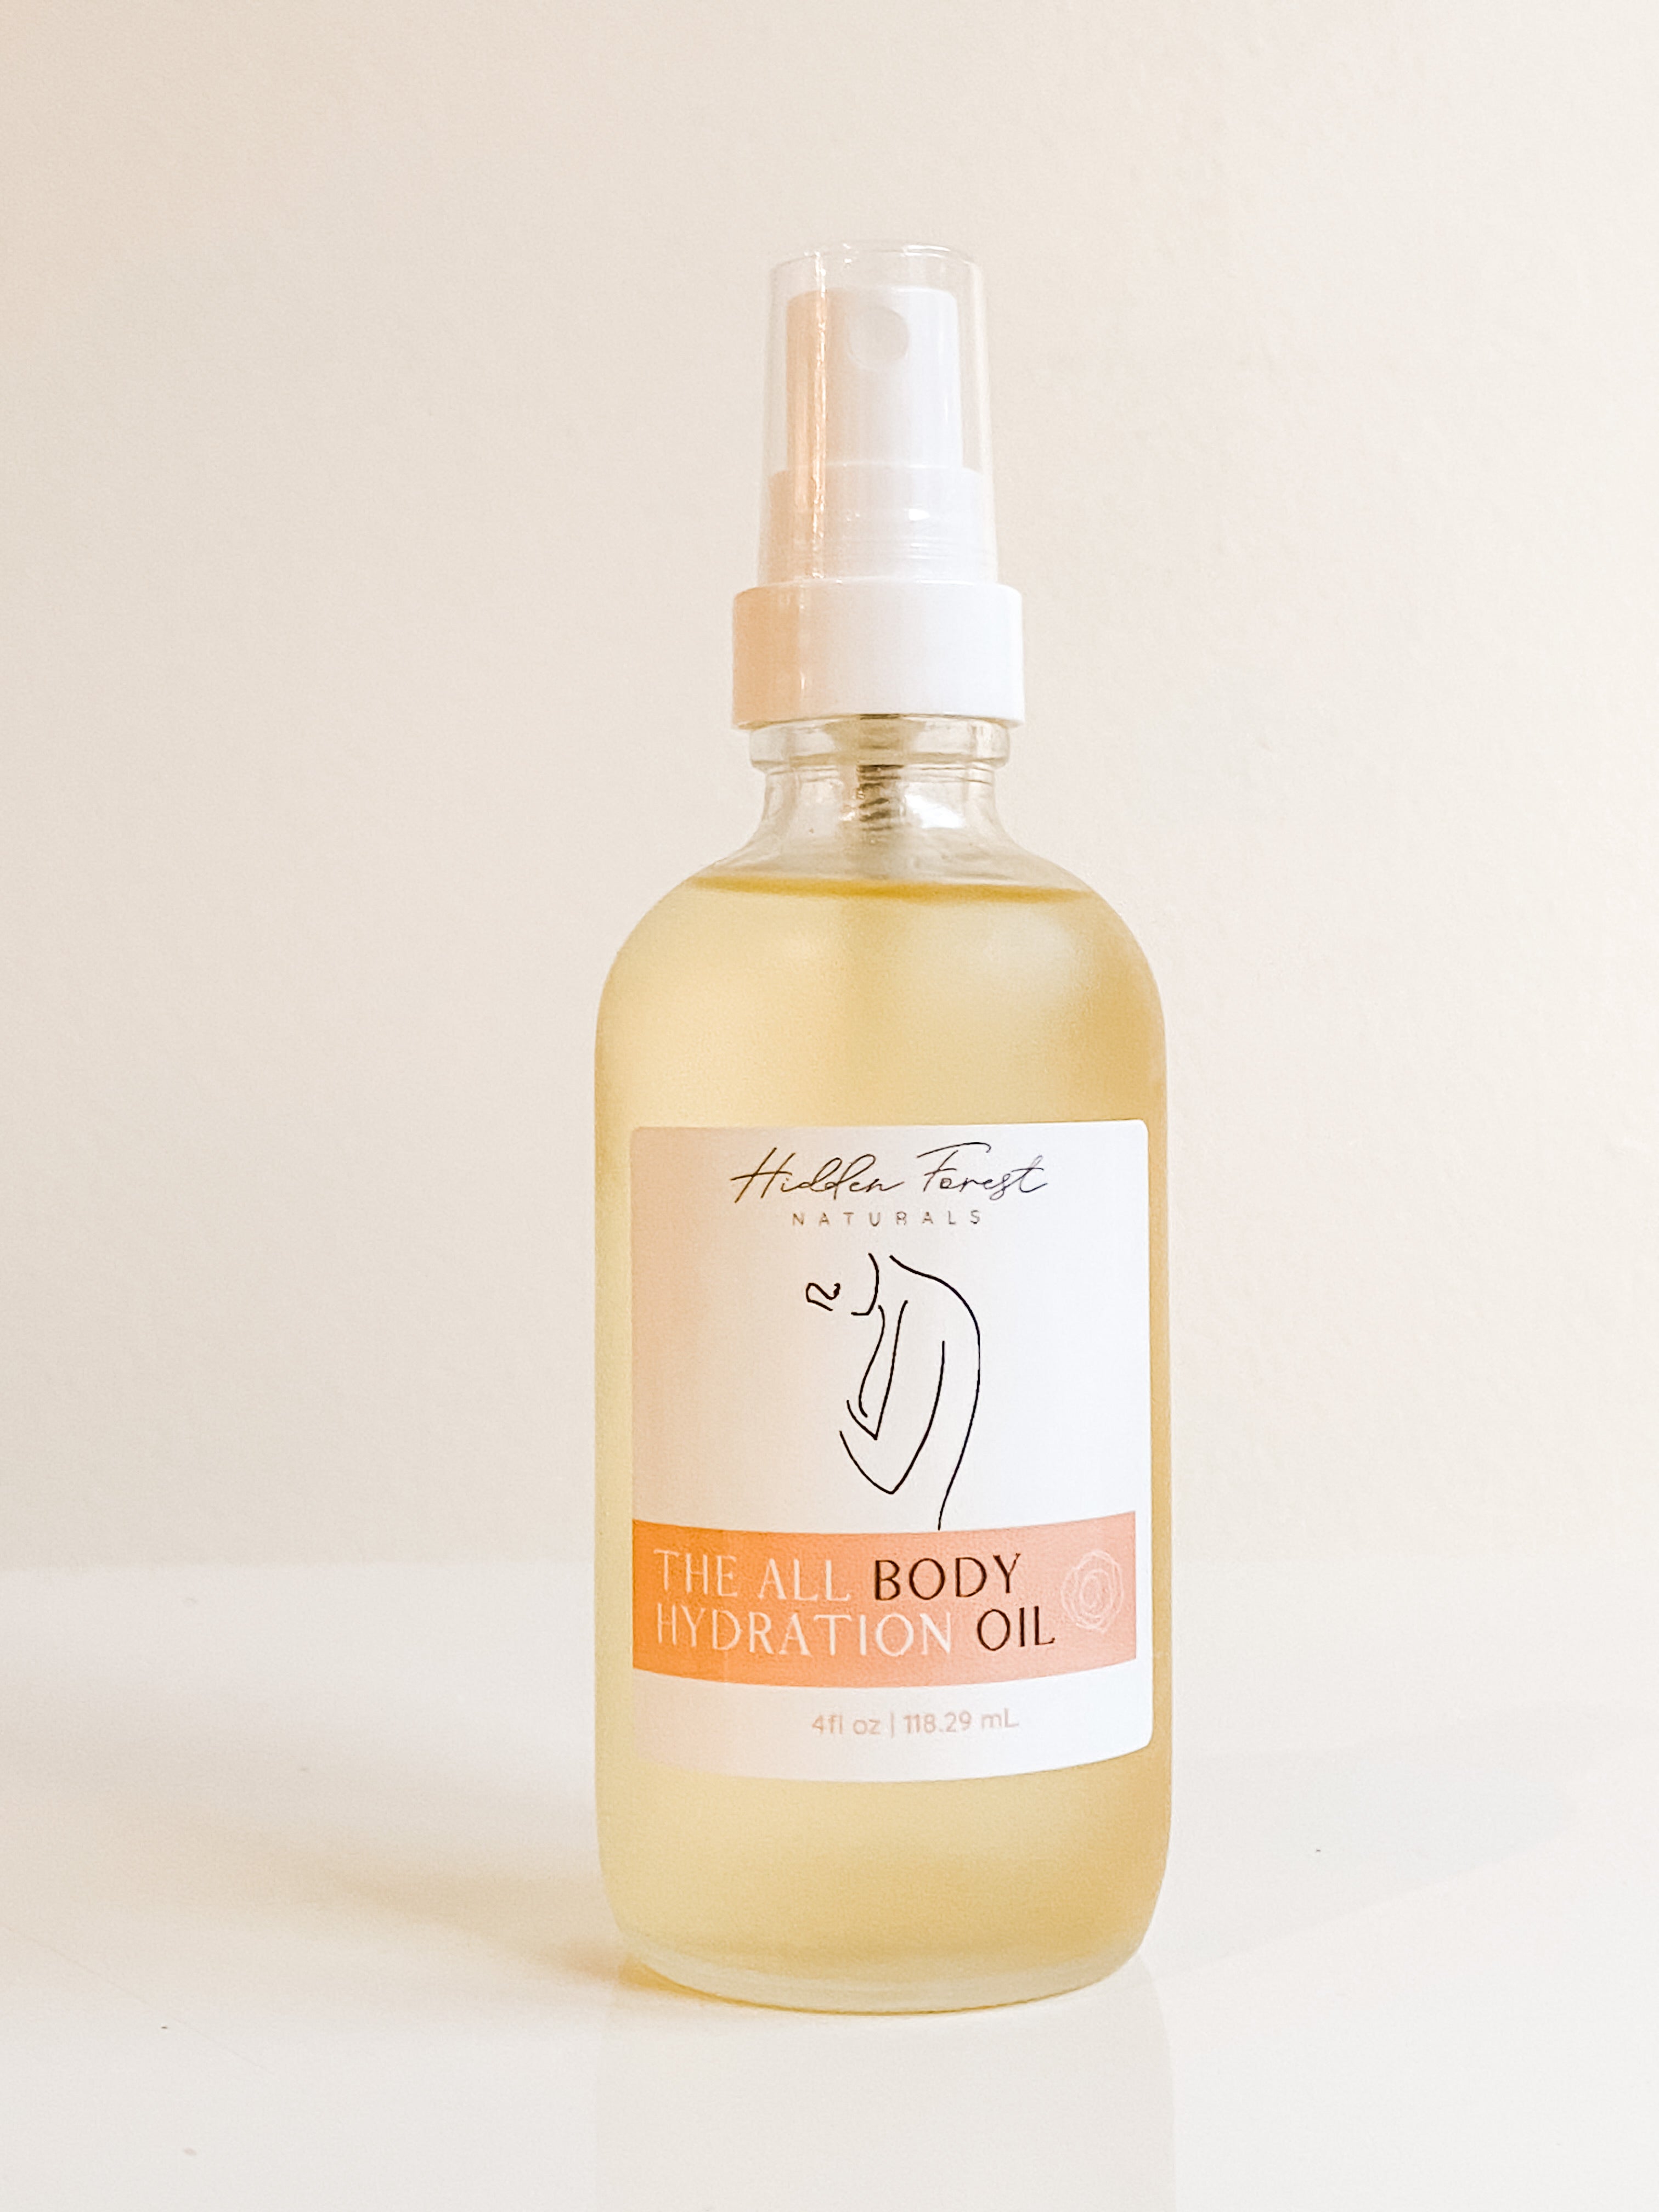 The All Body Hydration Oil